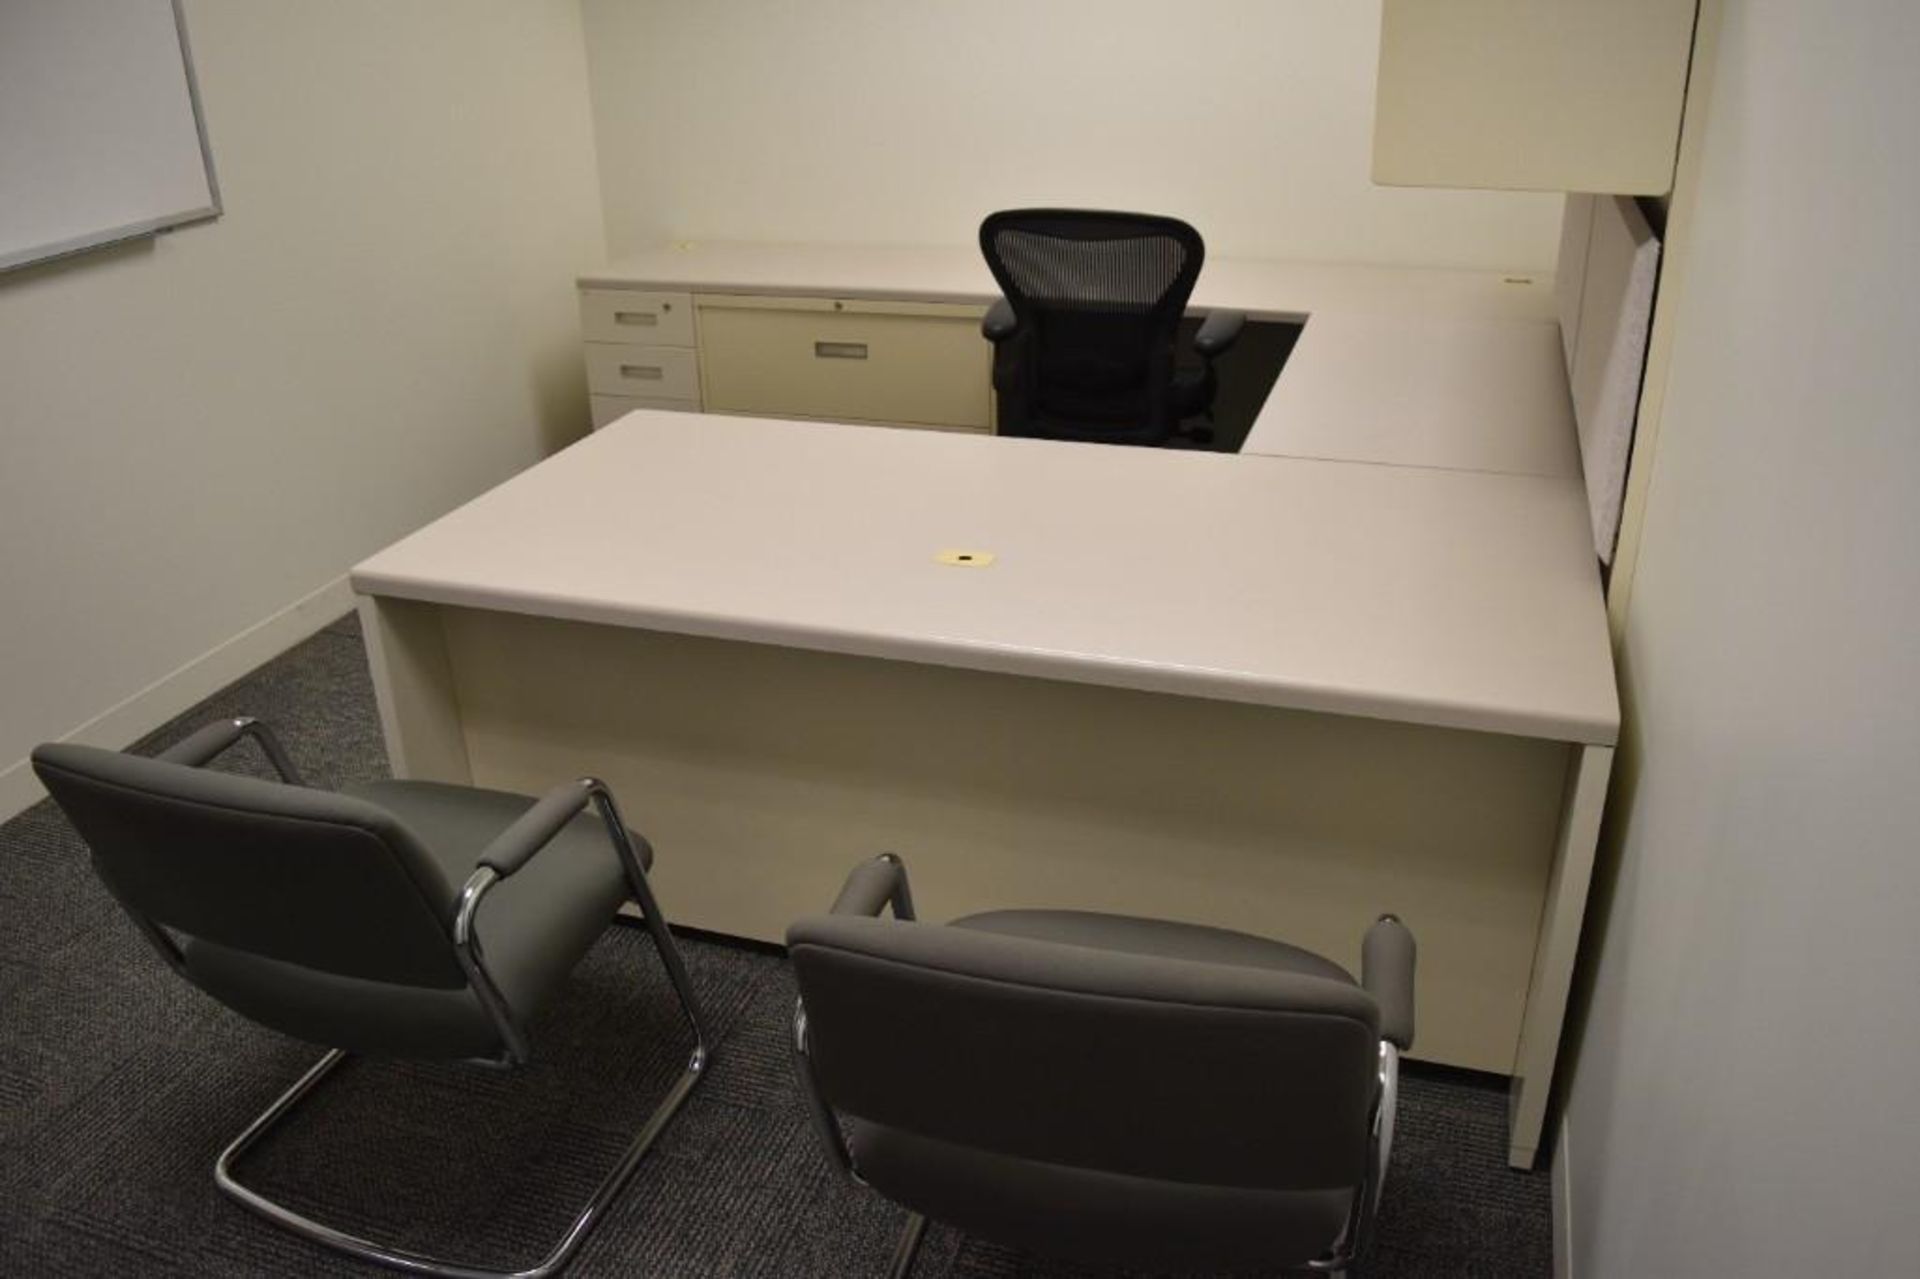 Lot c/o: (26) Assorted Office Suites - Relocated for ease of removal - Image 15 of 106